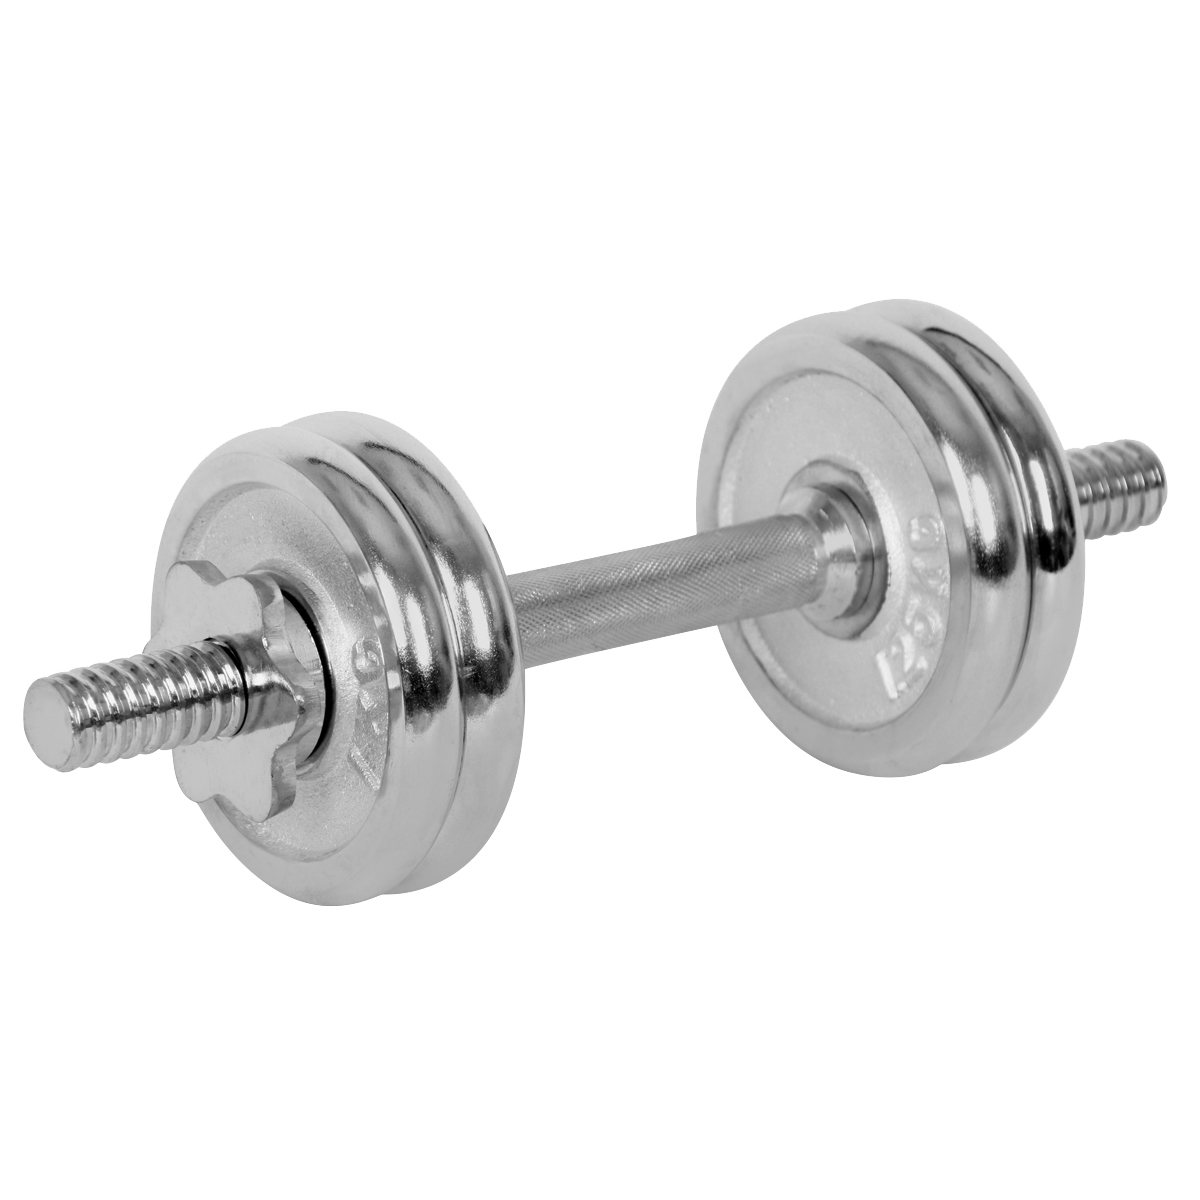 ONE-HAND WEIGHT 6 kg CHROME - One-hand adjustable weight